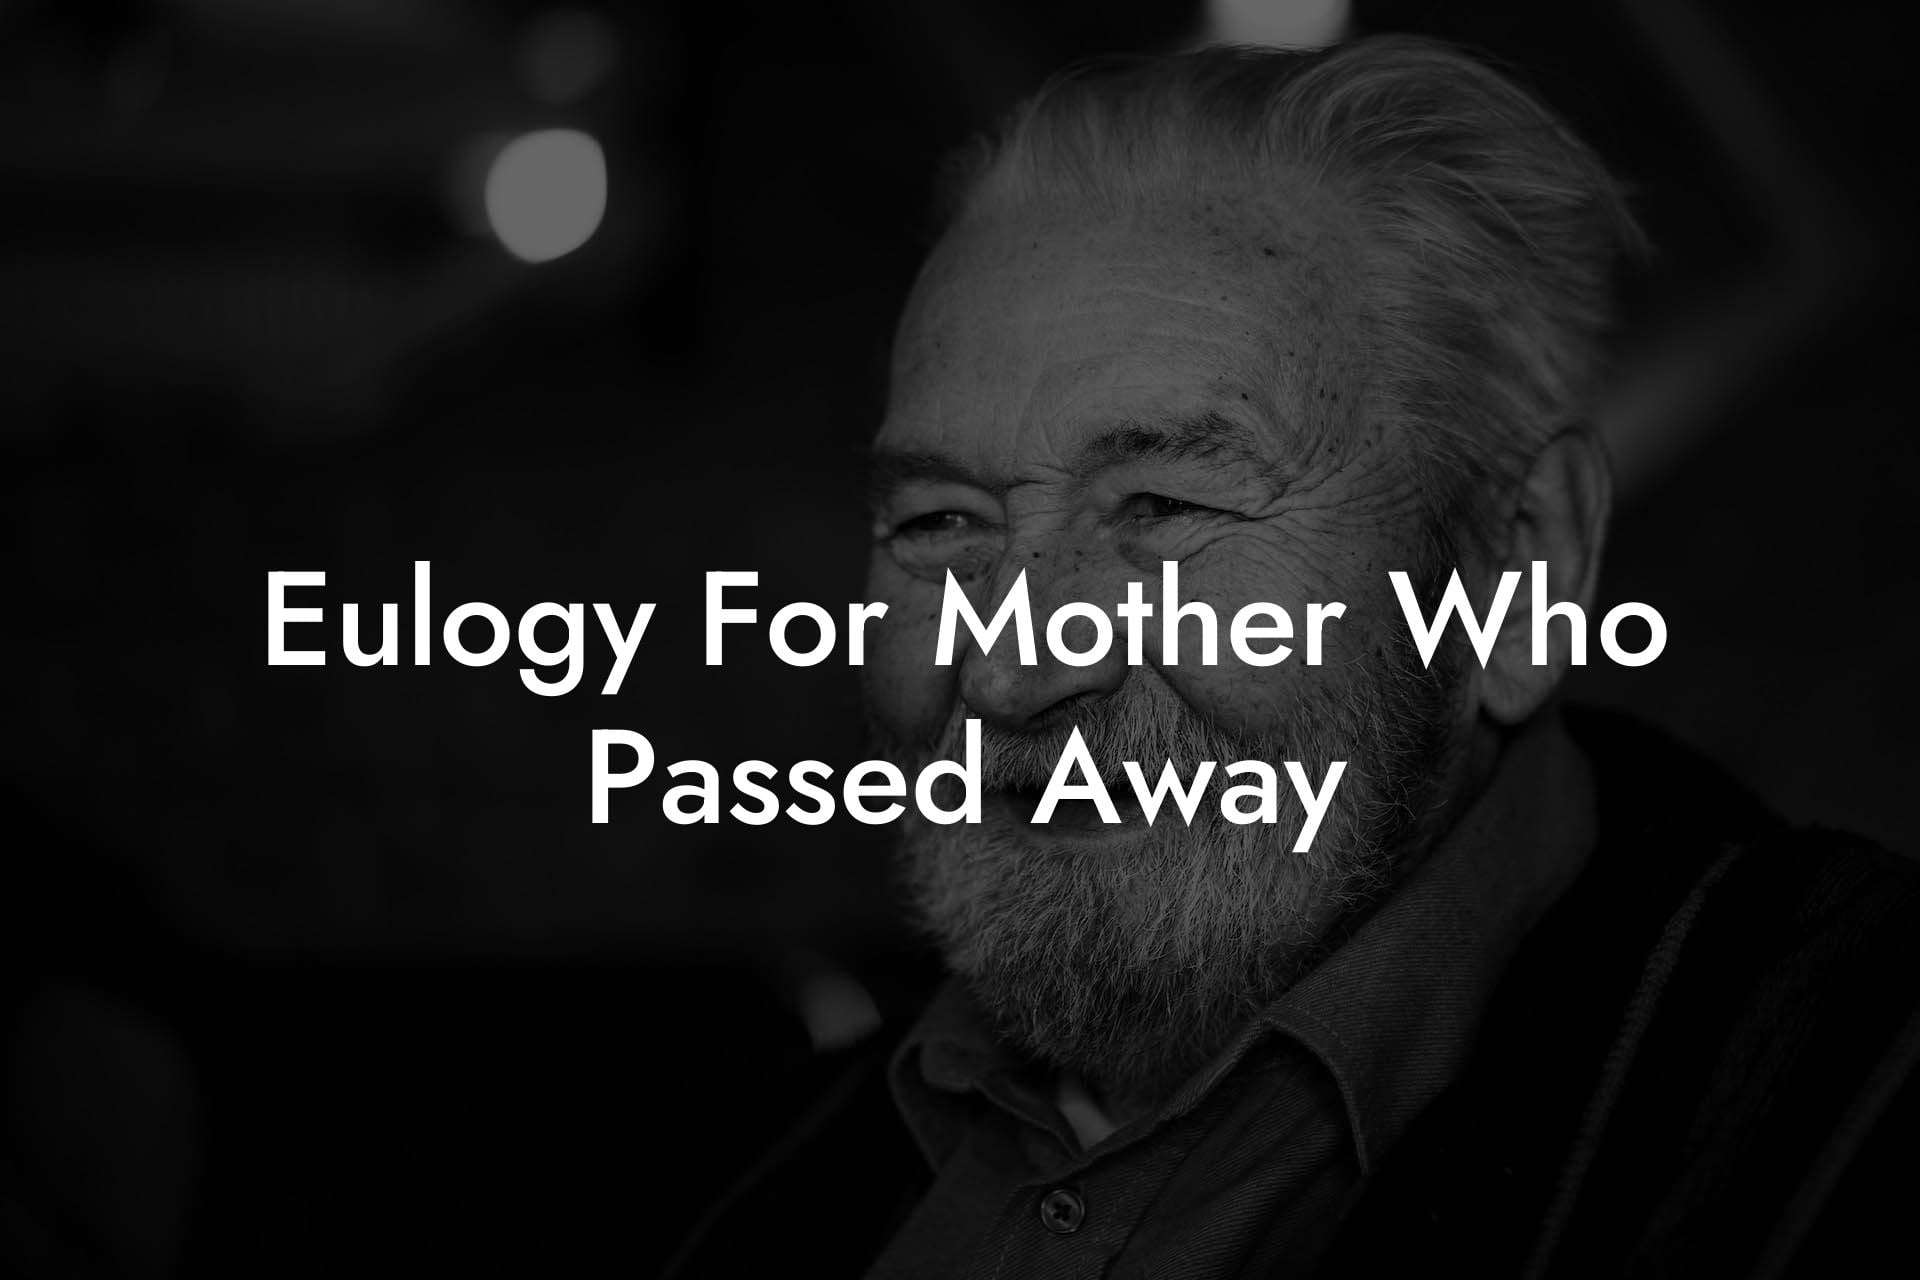 Eulogy For Mother Who Passed Away